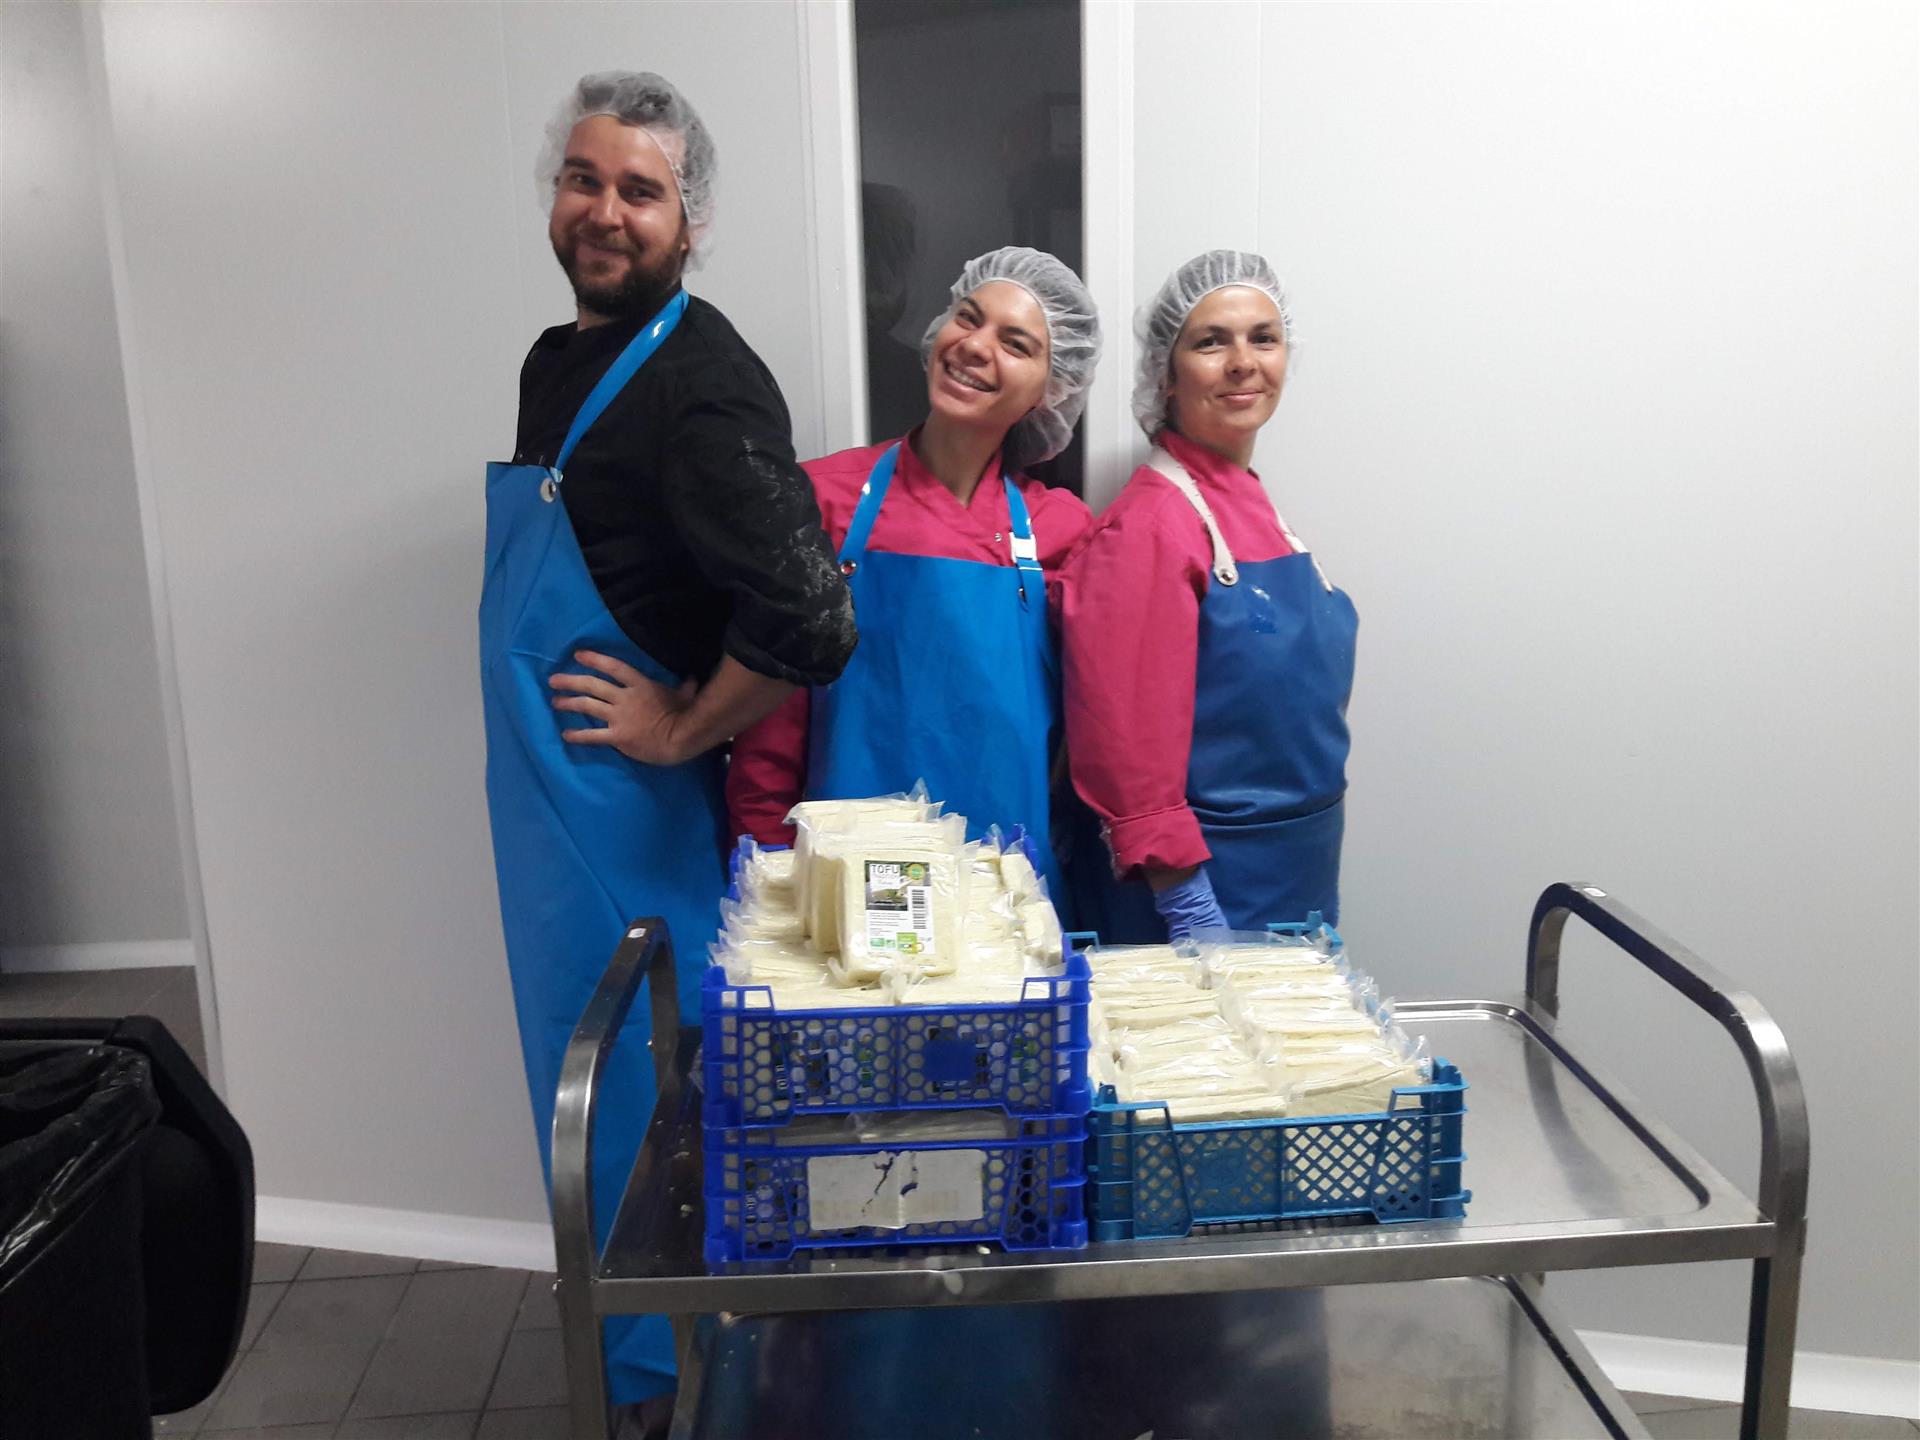 Le tofu artisanal "made in Sud-Ouest"